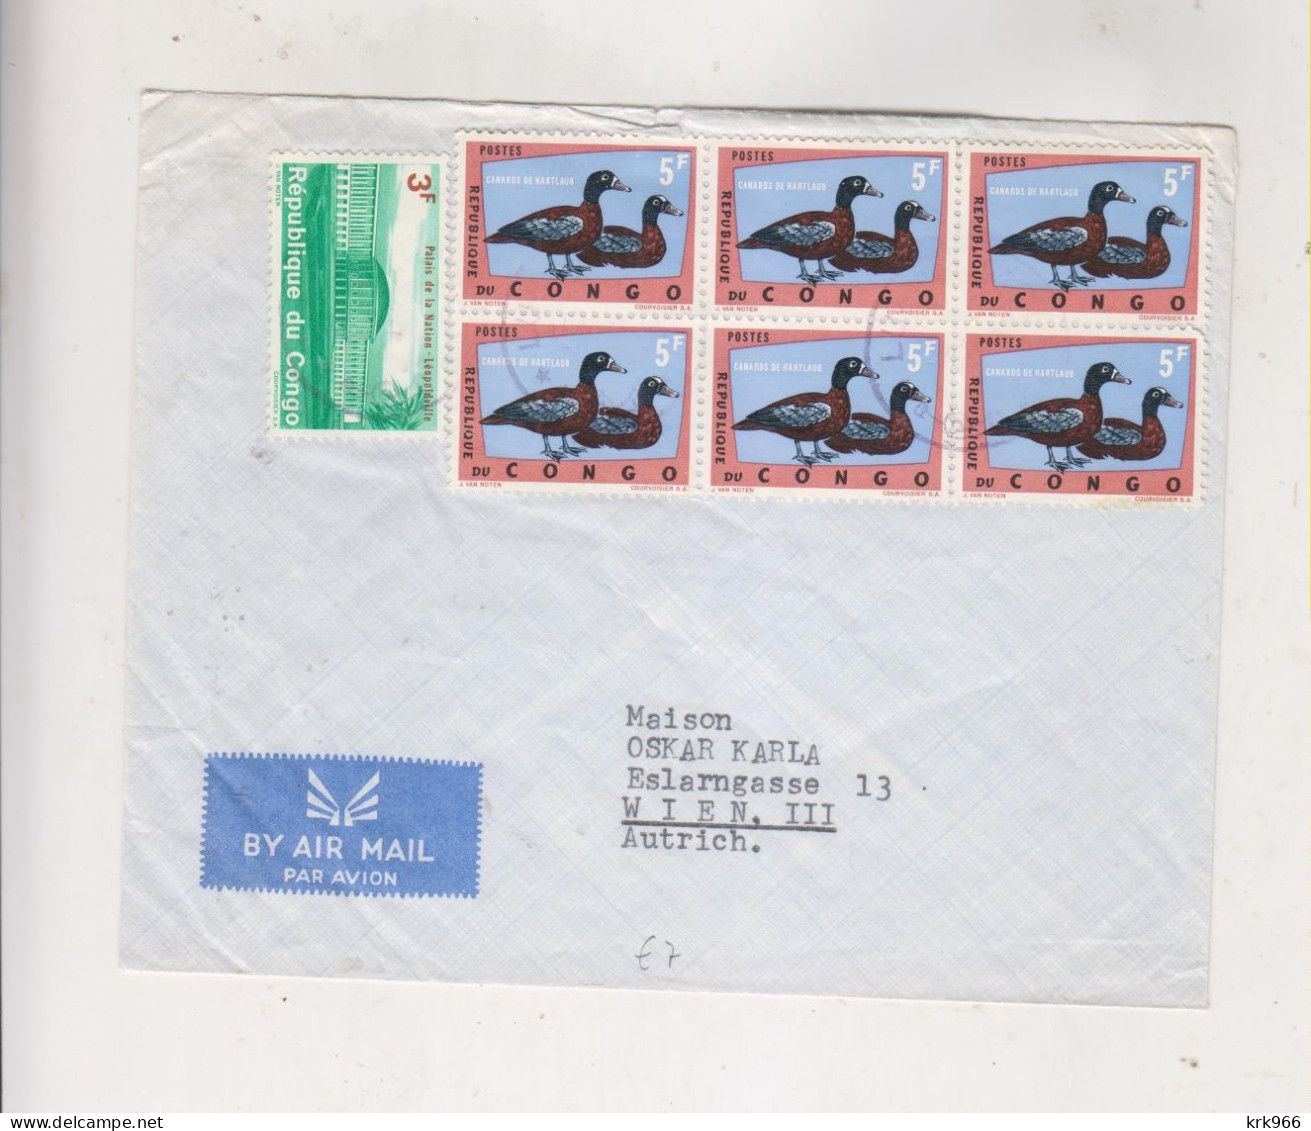 CONGO LUBUMBASHI  Airmail Cover To Austria - Covers & Documents